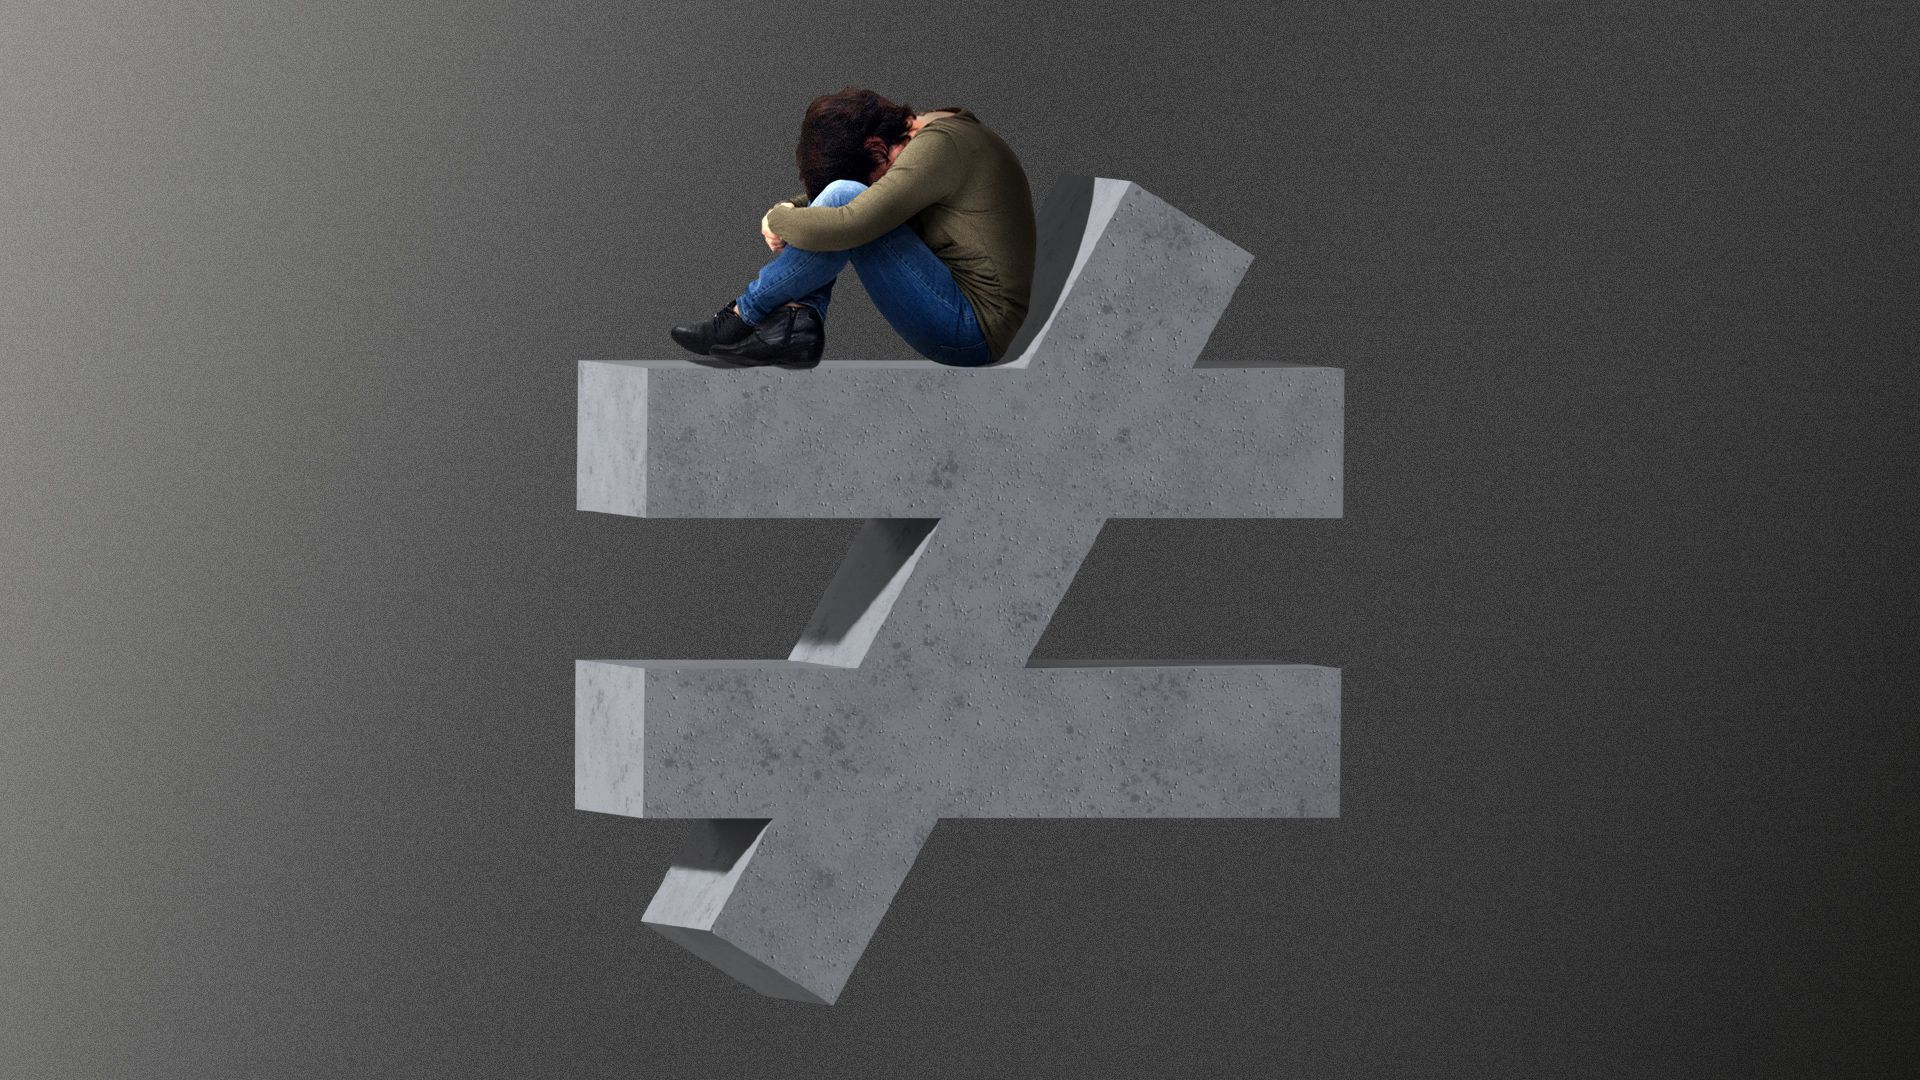 Illustration of a person sitting hunched over on top of a large 3d "not equal" sign.